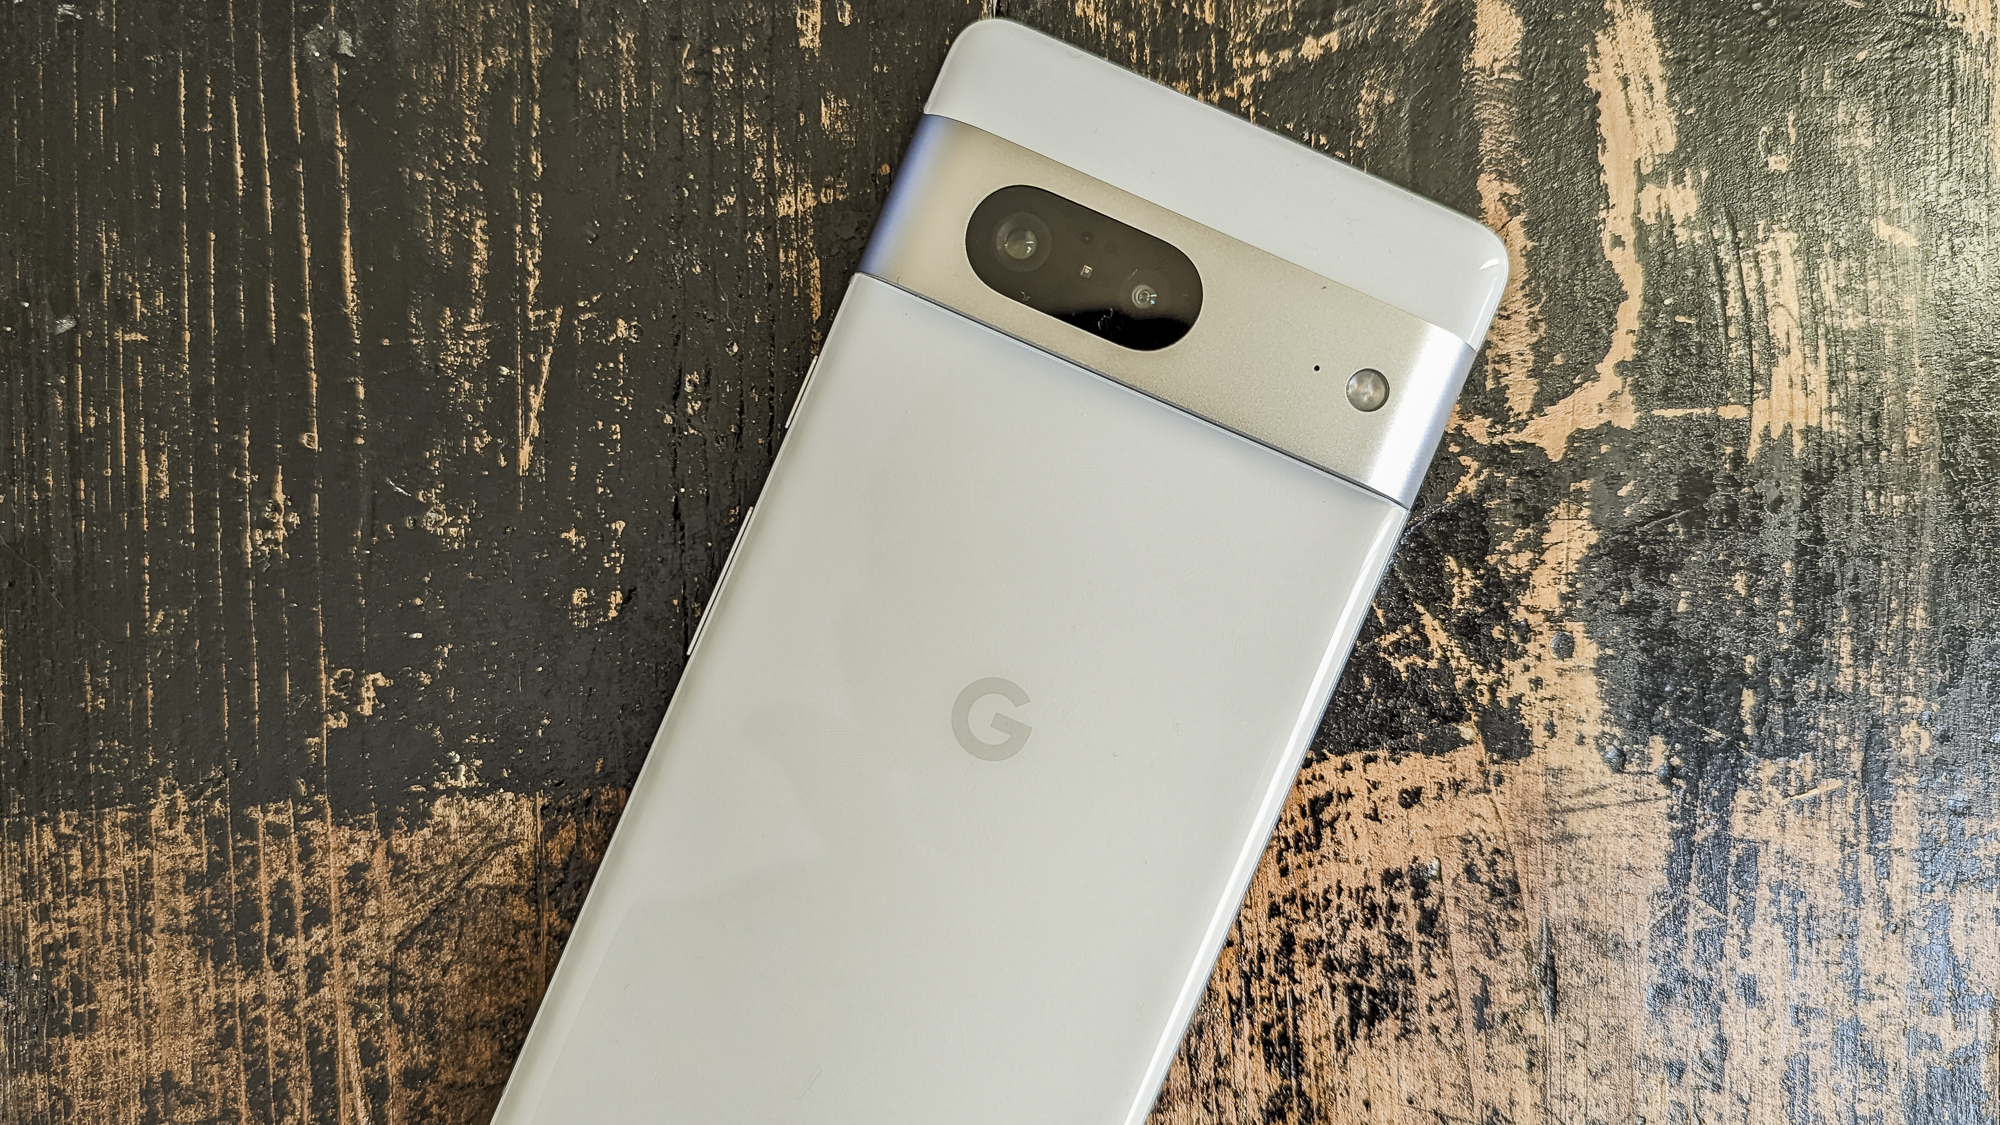 Google Pixel 7 with a capacity of 128 GB